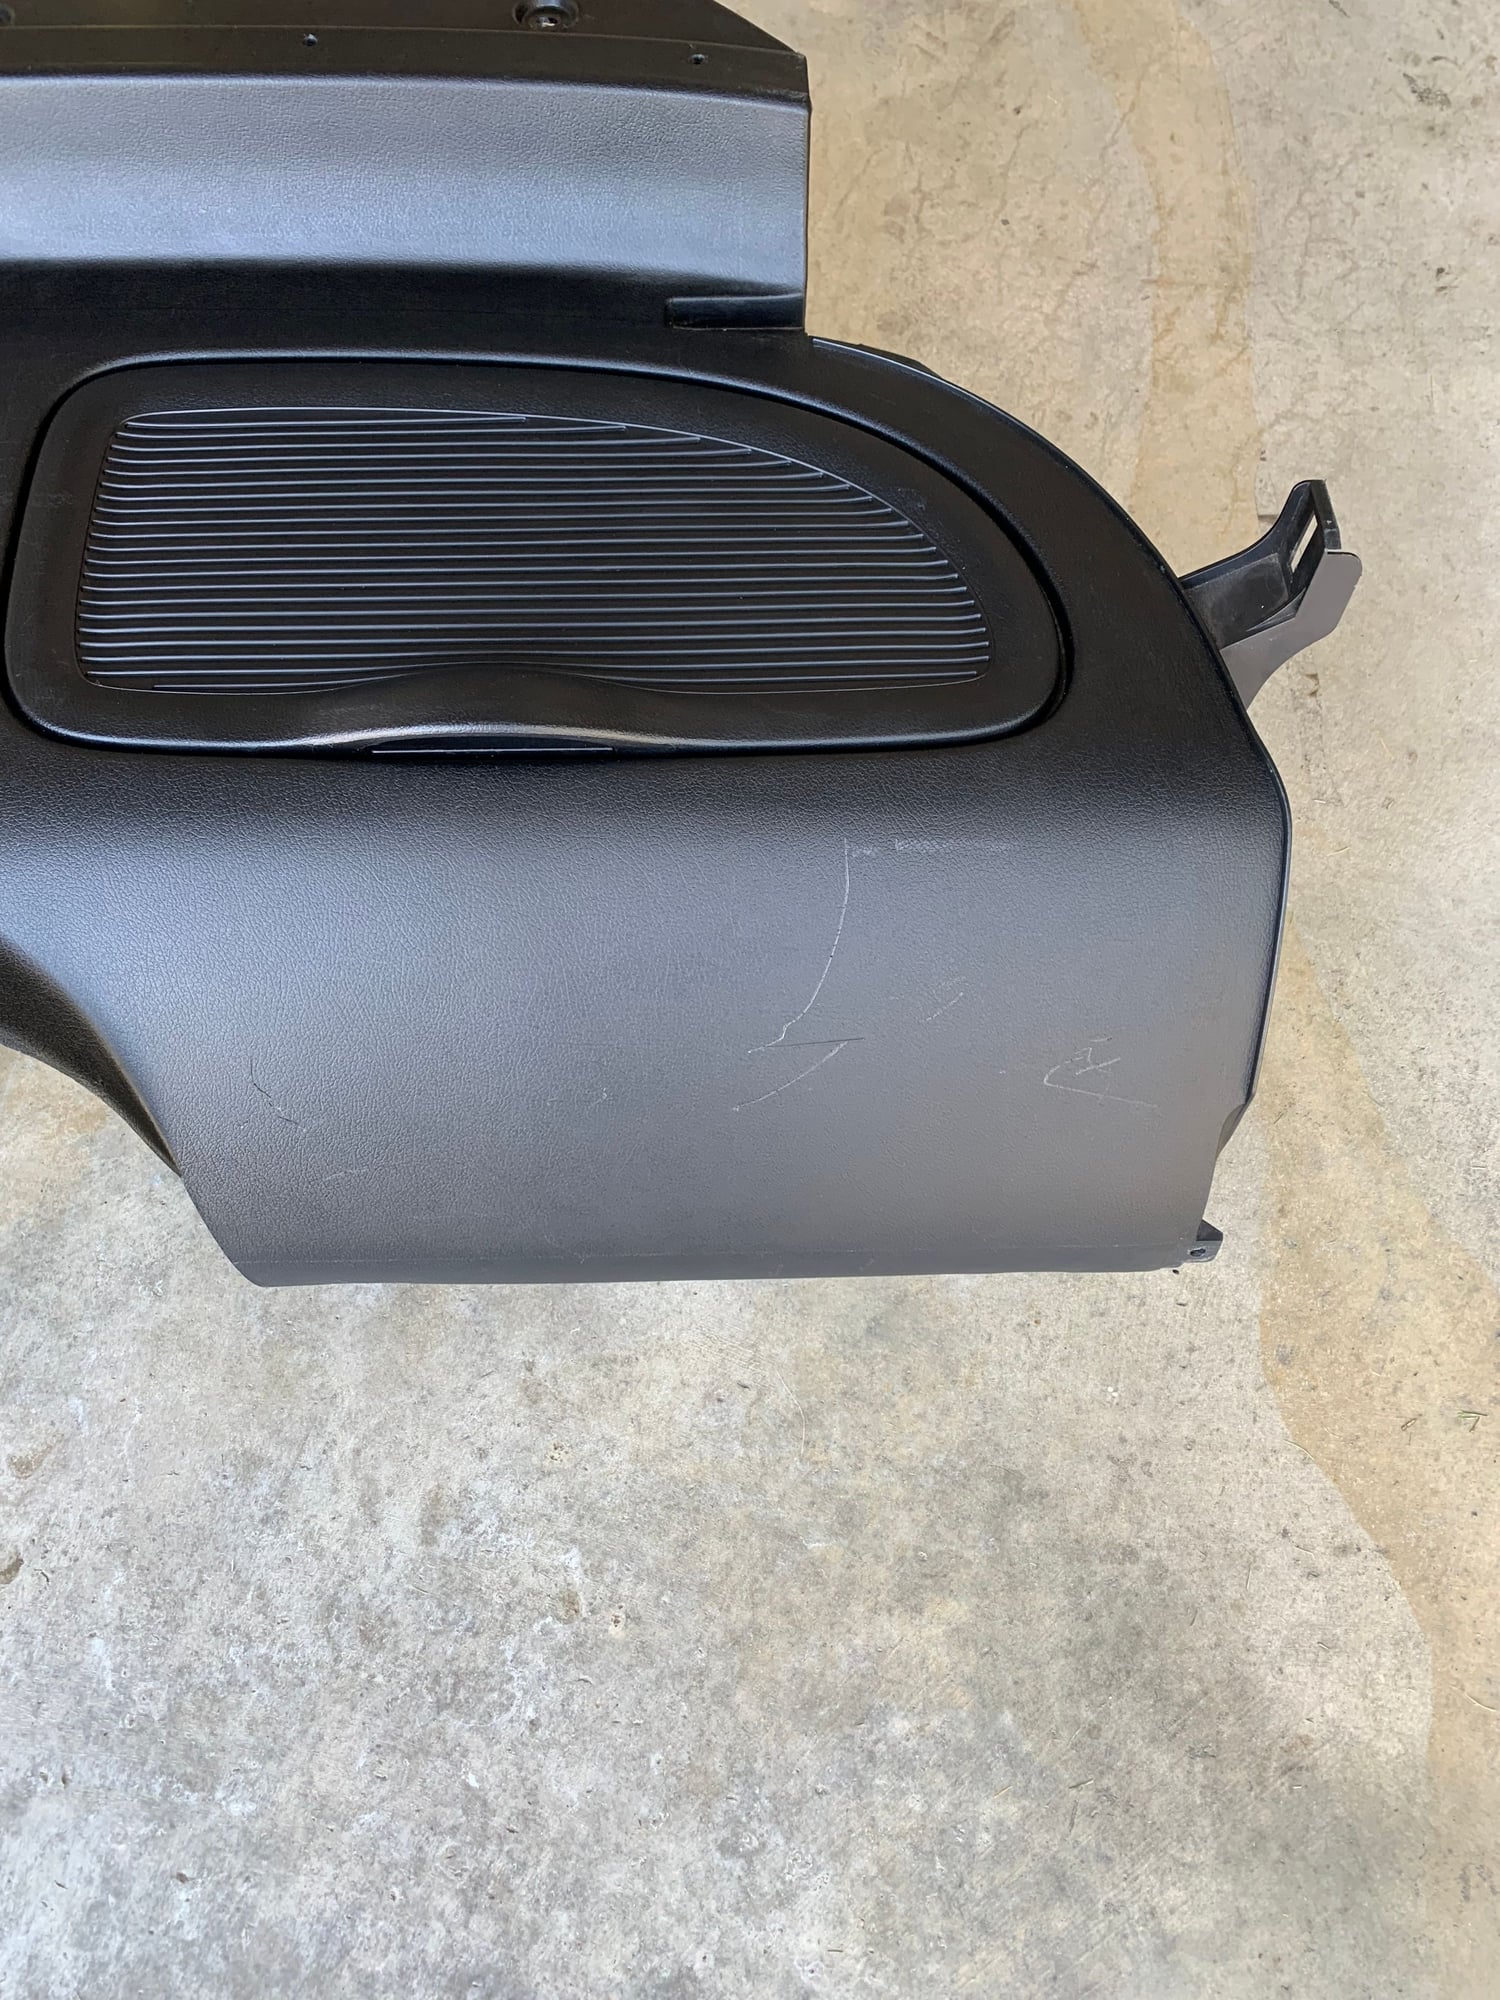 Interior/Upholstery - black storage bins - Used - 1993 to 1995 Mazda RX-7 - St.louis, MO 63031, United States